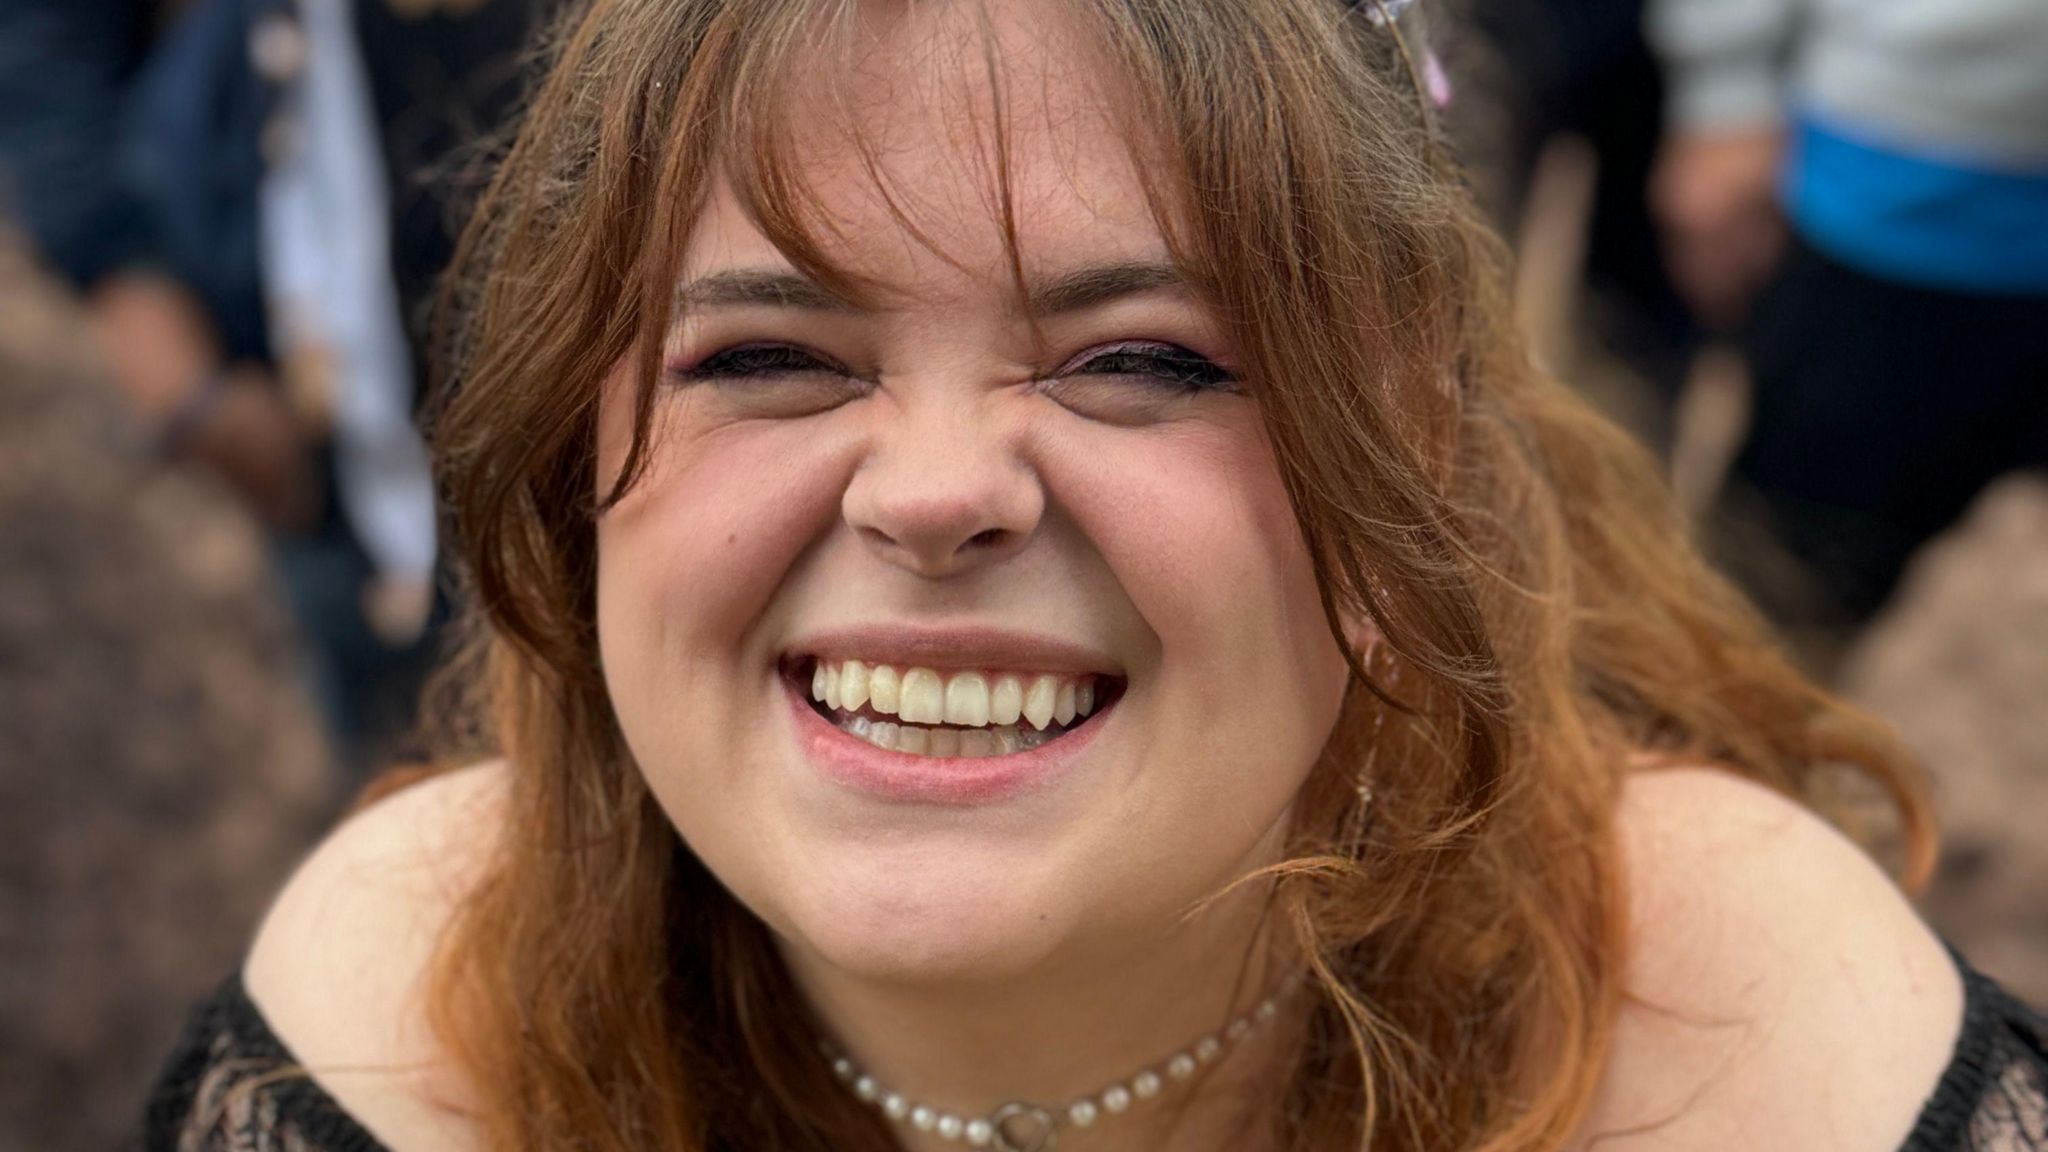 A young woman smiles into the camera